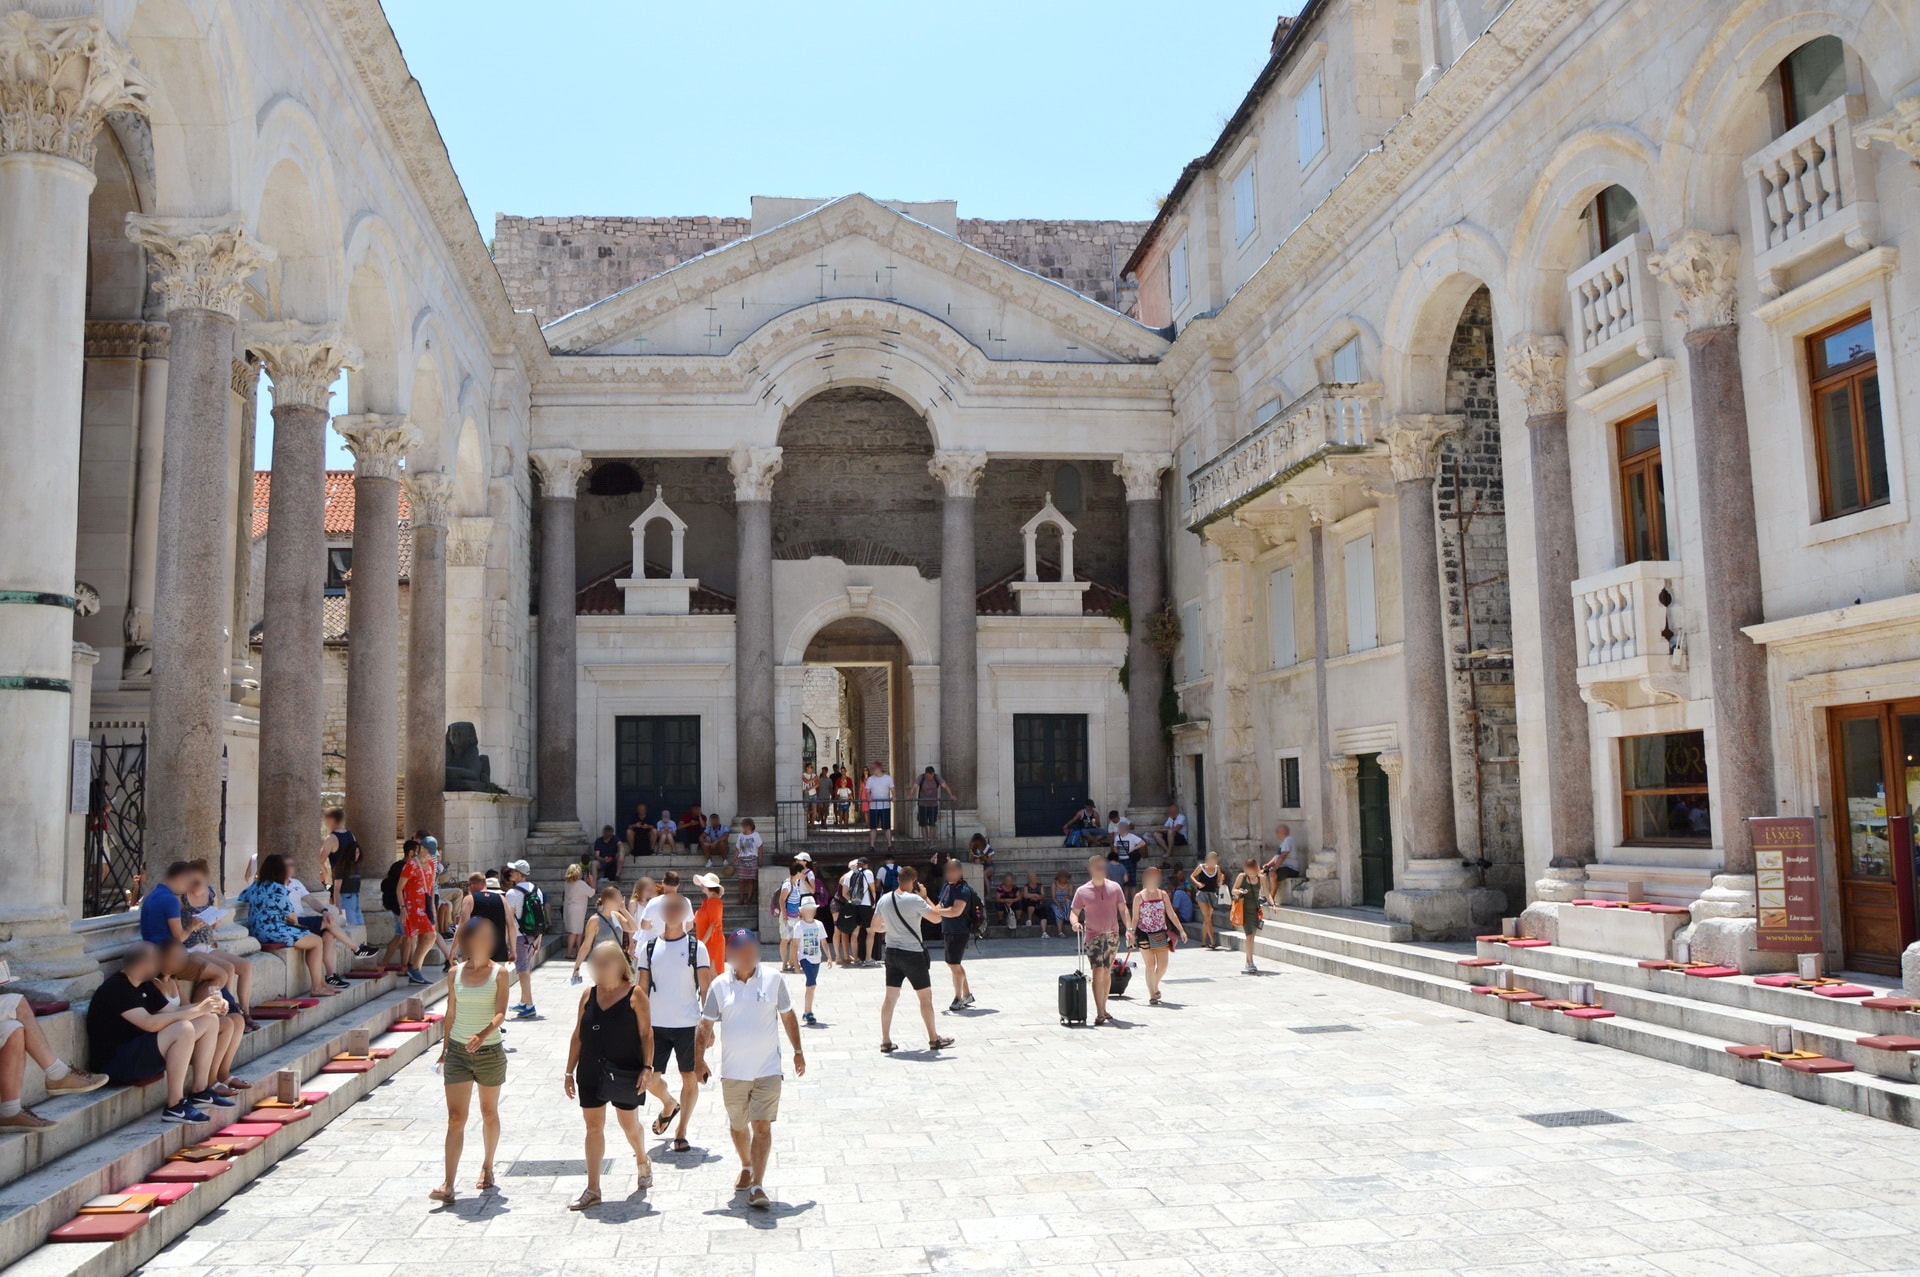 Peristyle Square in the heart of the Diocletian's Palace